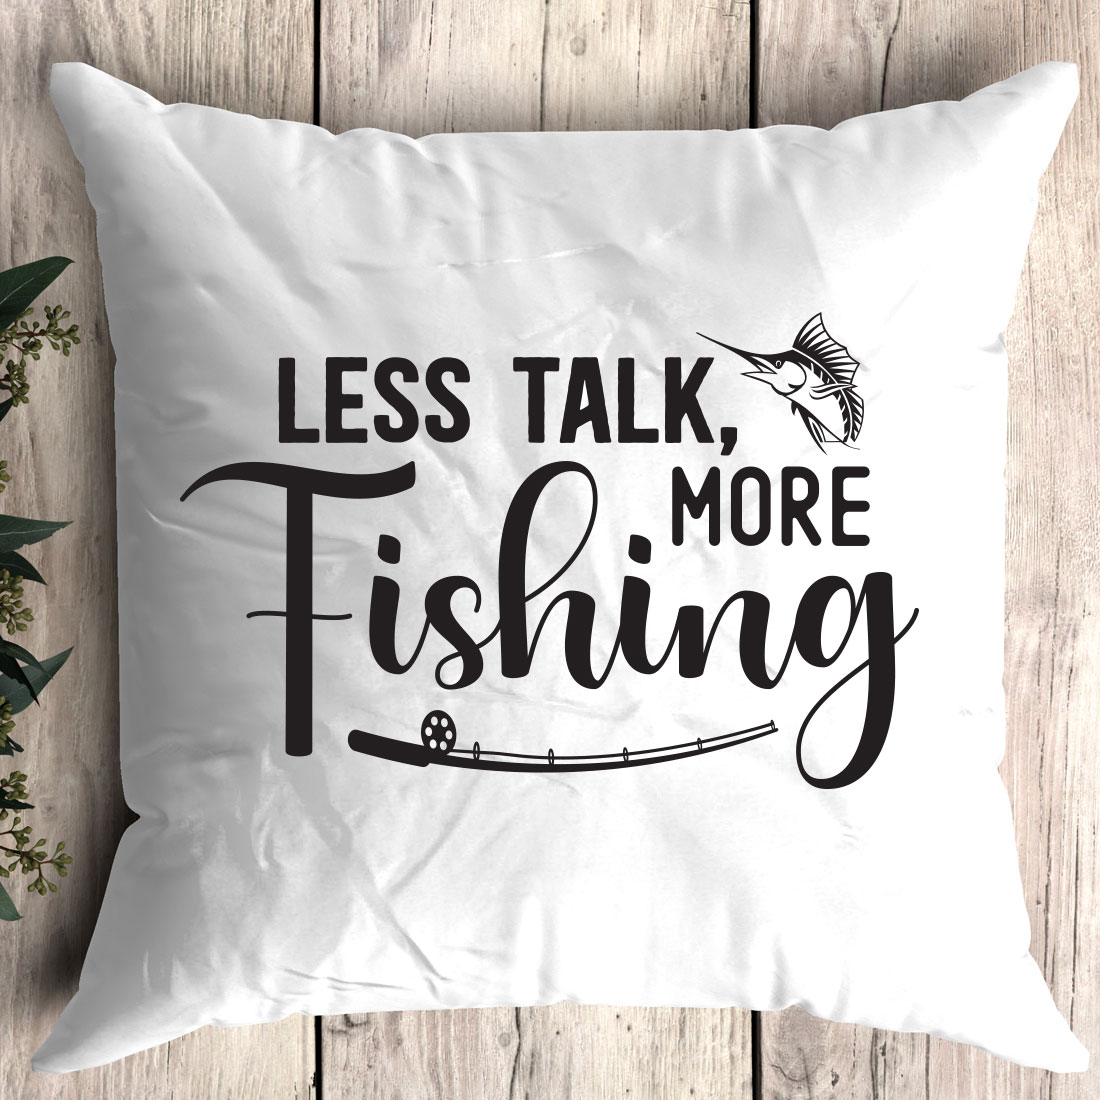 Pillow that says less talk more fishing.